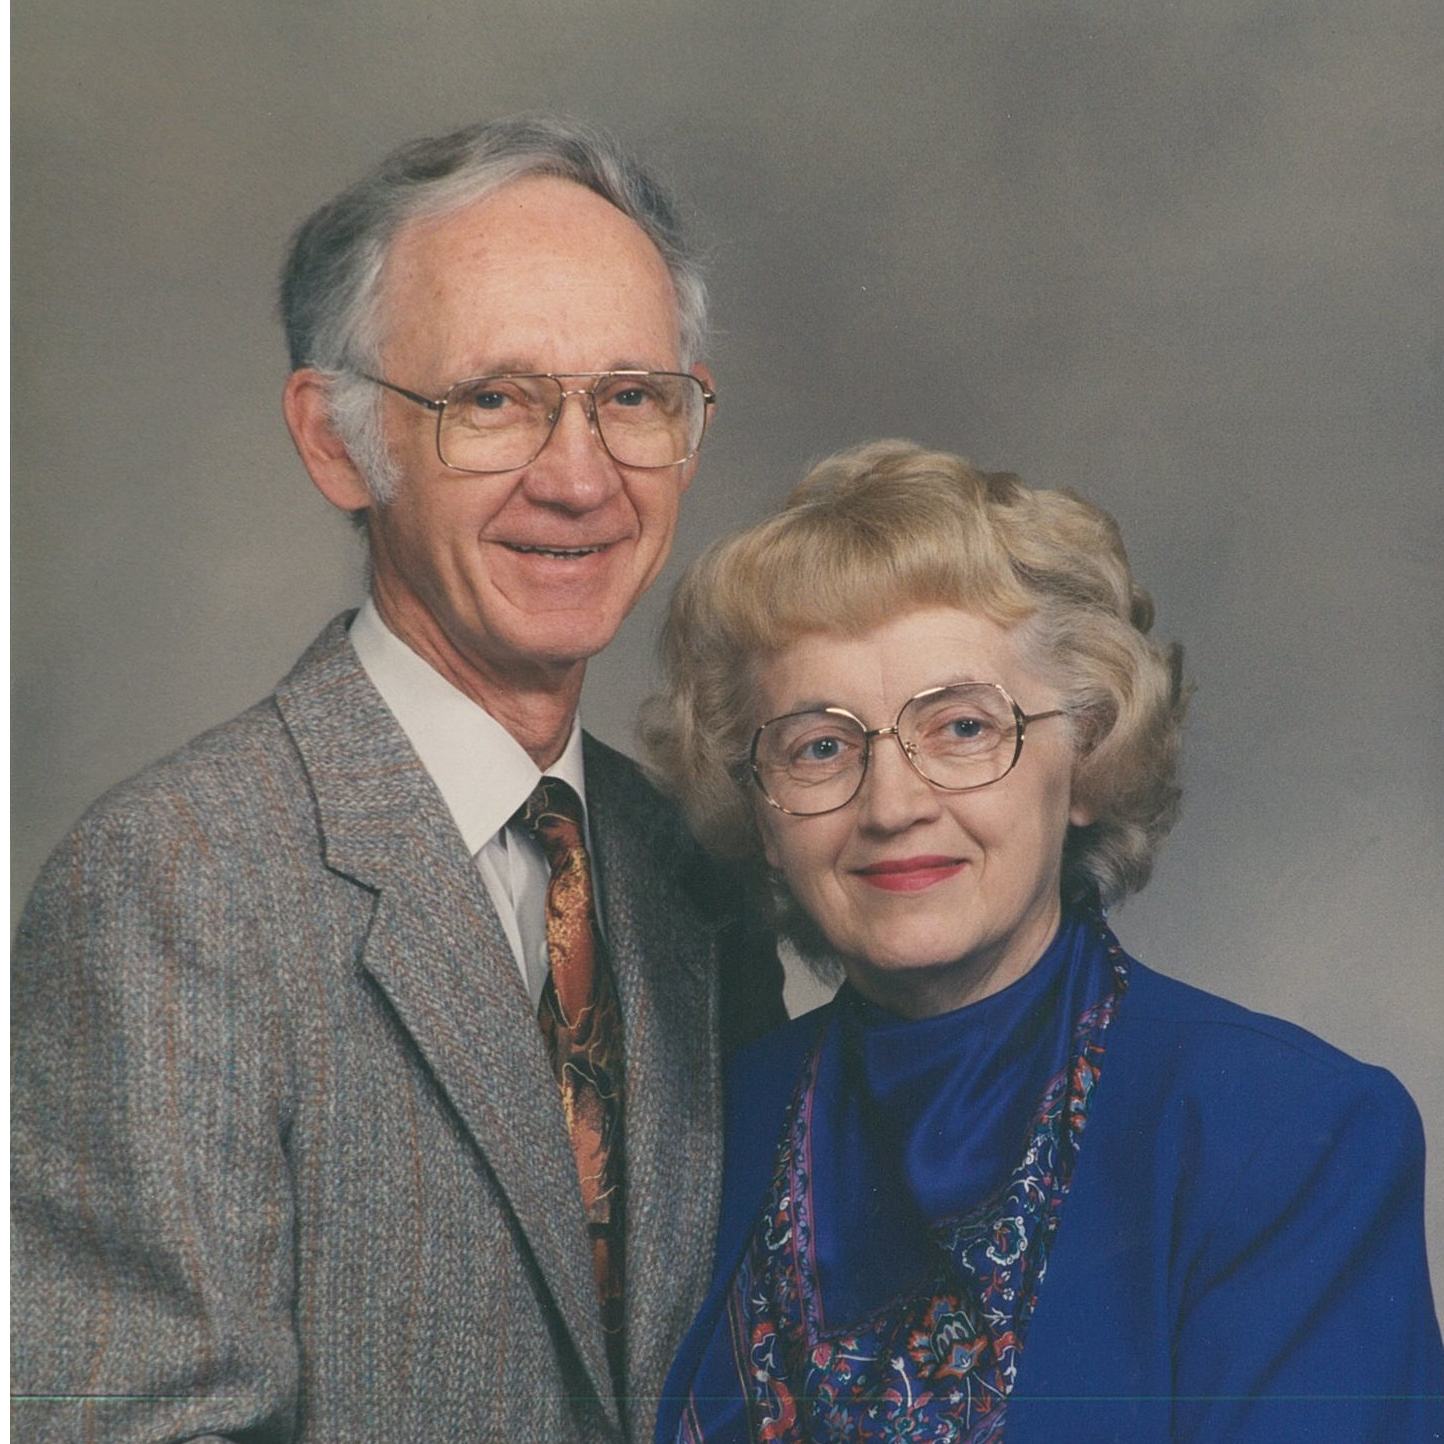 Dr. Harold Cordts & Ms. Jeanne M. Cordts